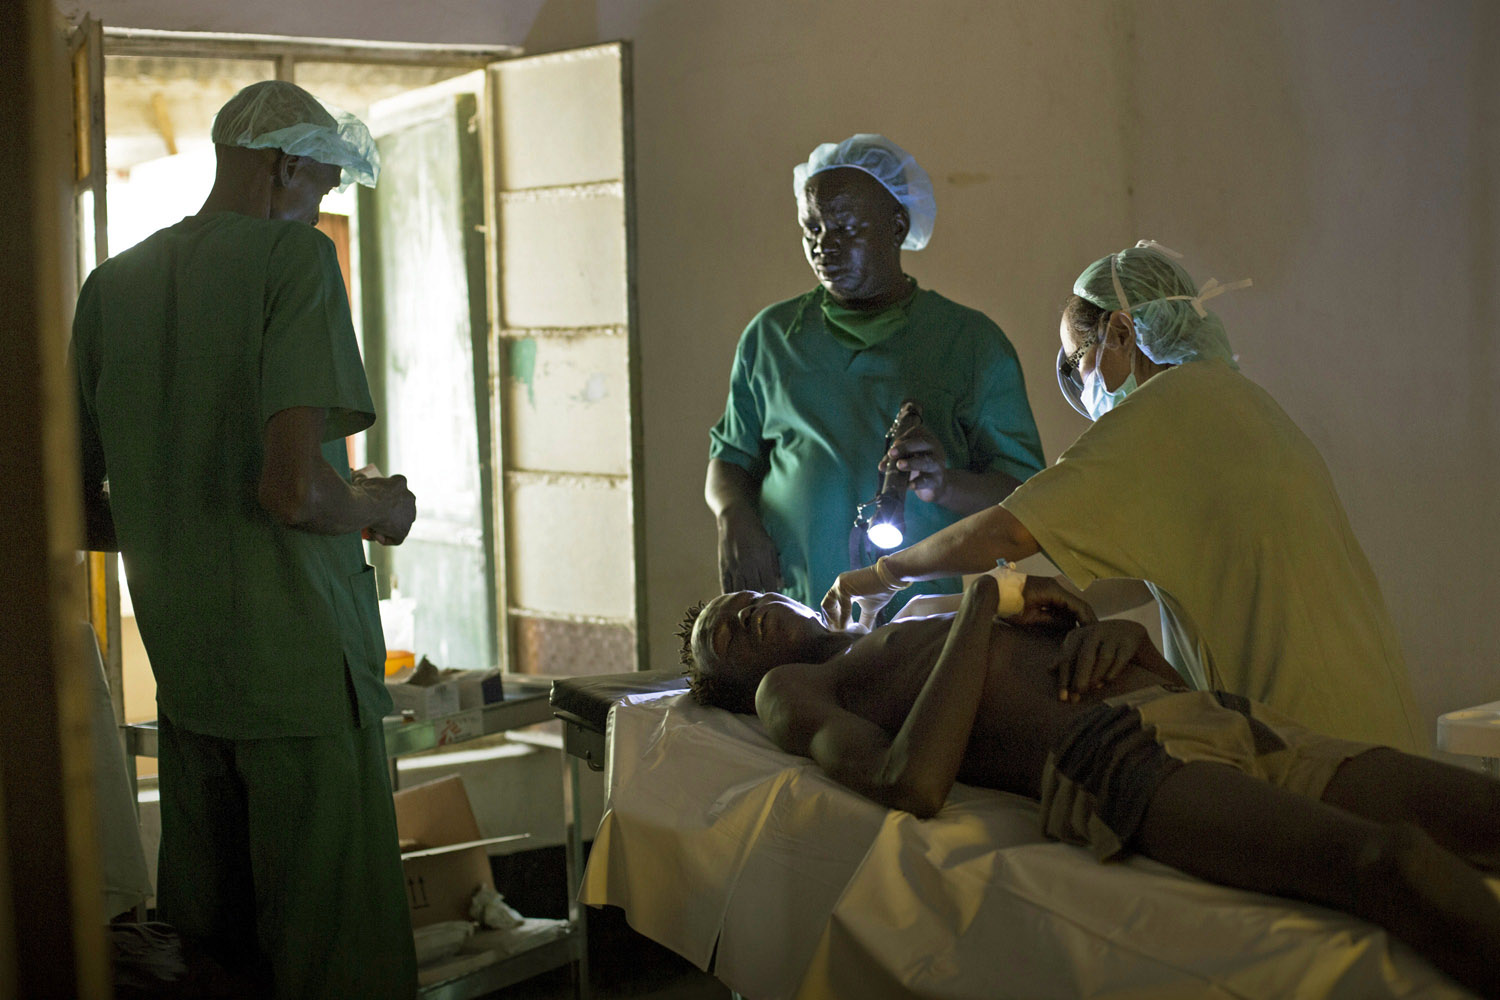 July 15, 2013. Doctors examine a patient in a hospital in Bor, South Sudan, suffering from injuries sustained during tribal clashes that erupted in Jonglei State.